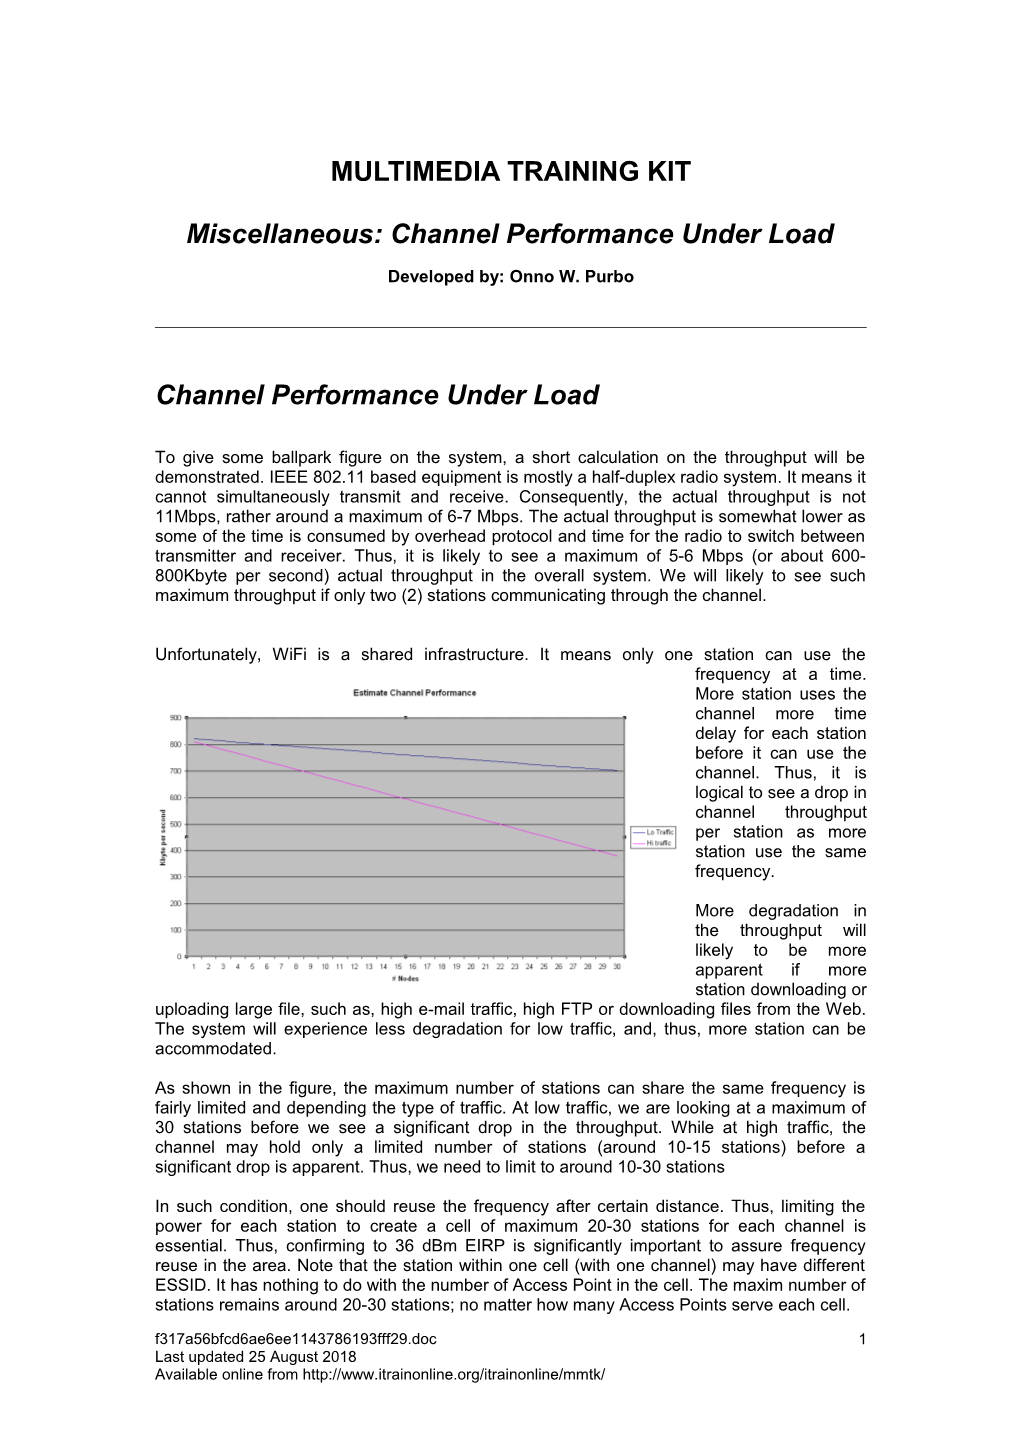 Miscellaneous: Channel Performance Under Load